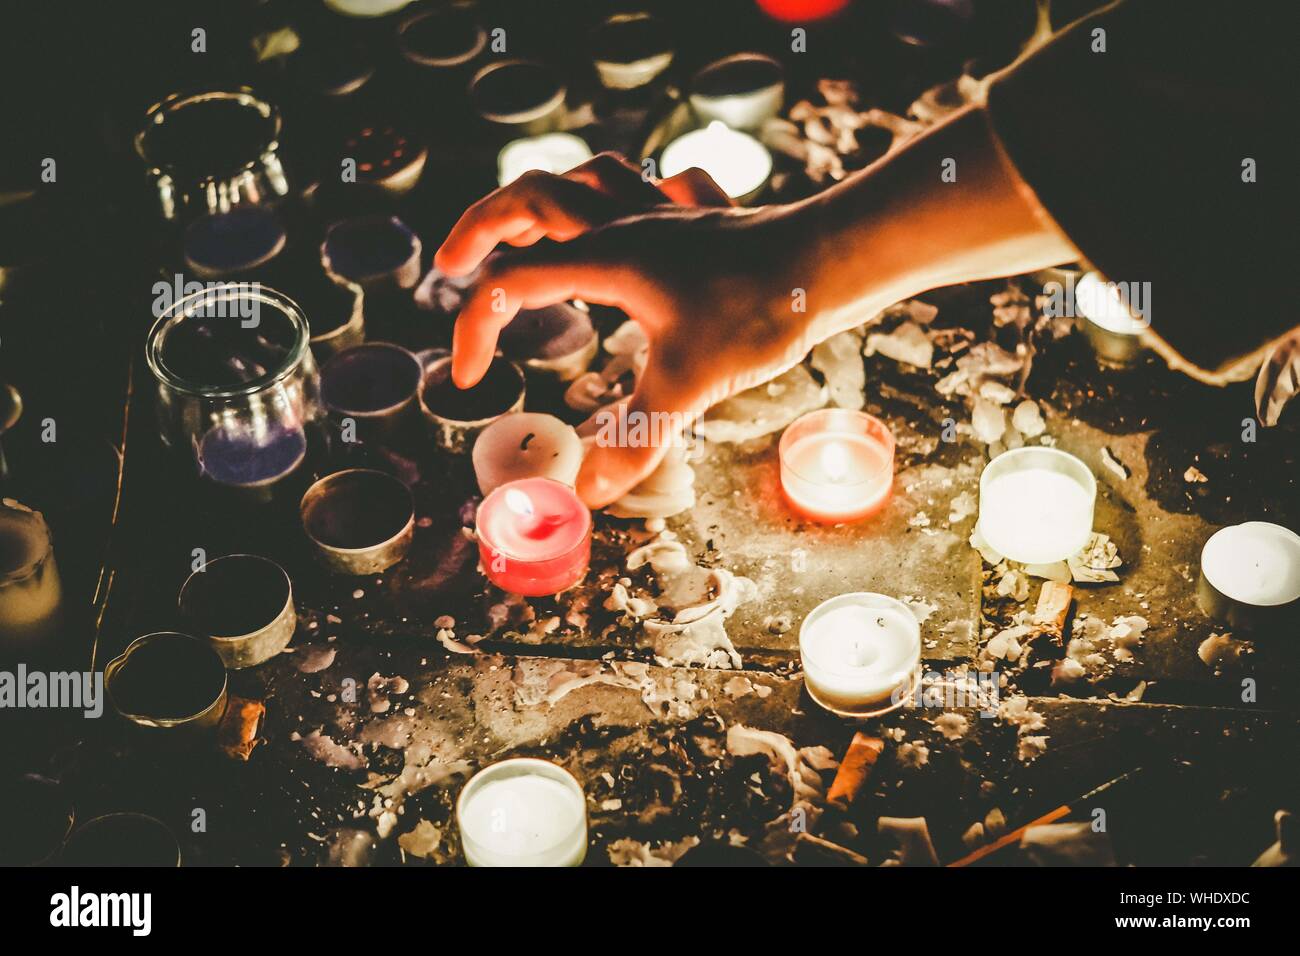 Person Placing Tea Light Candles Lit As Religious Belief Stock Photo